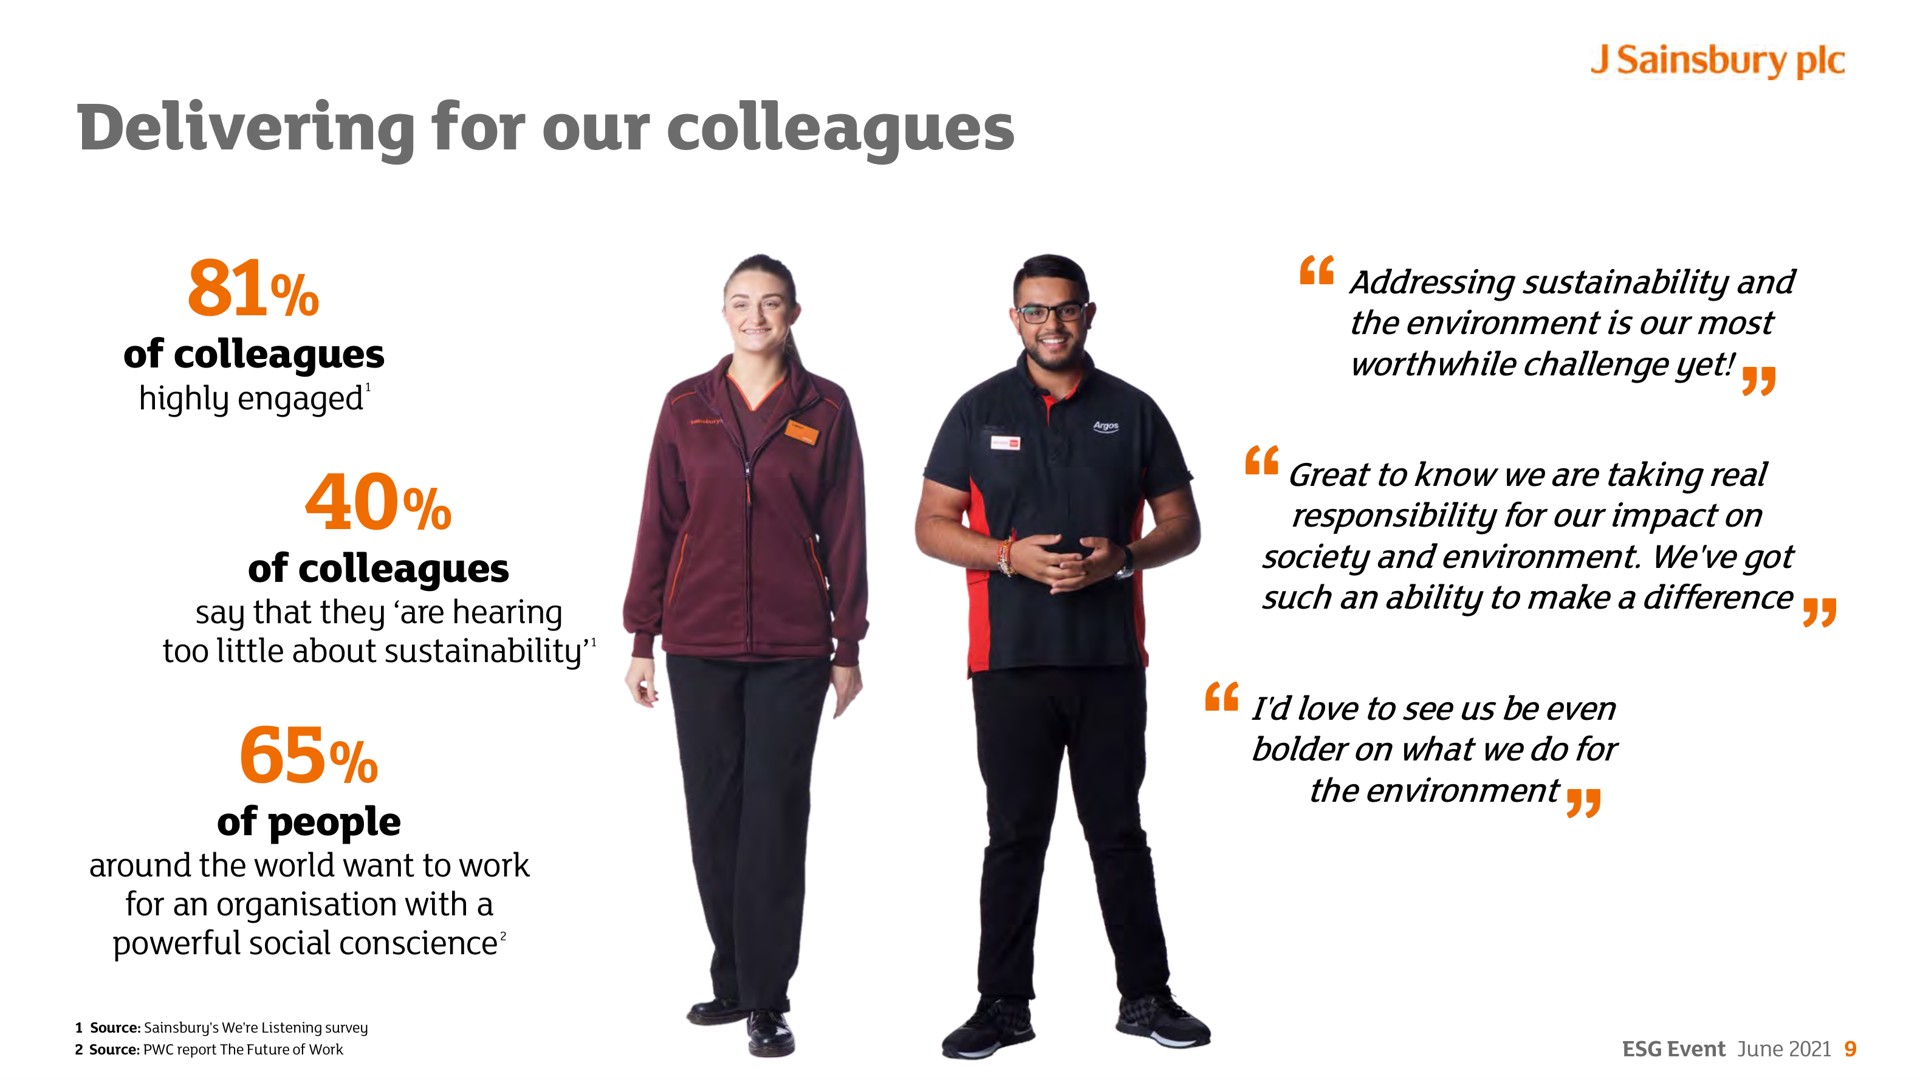 delivering for our colleagues | Sainsbury's